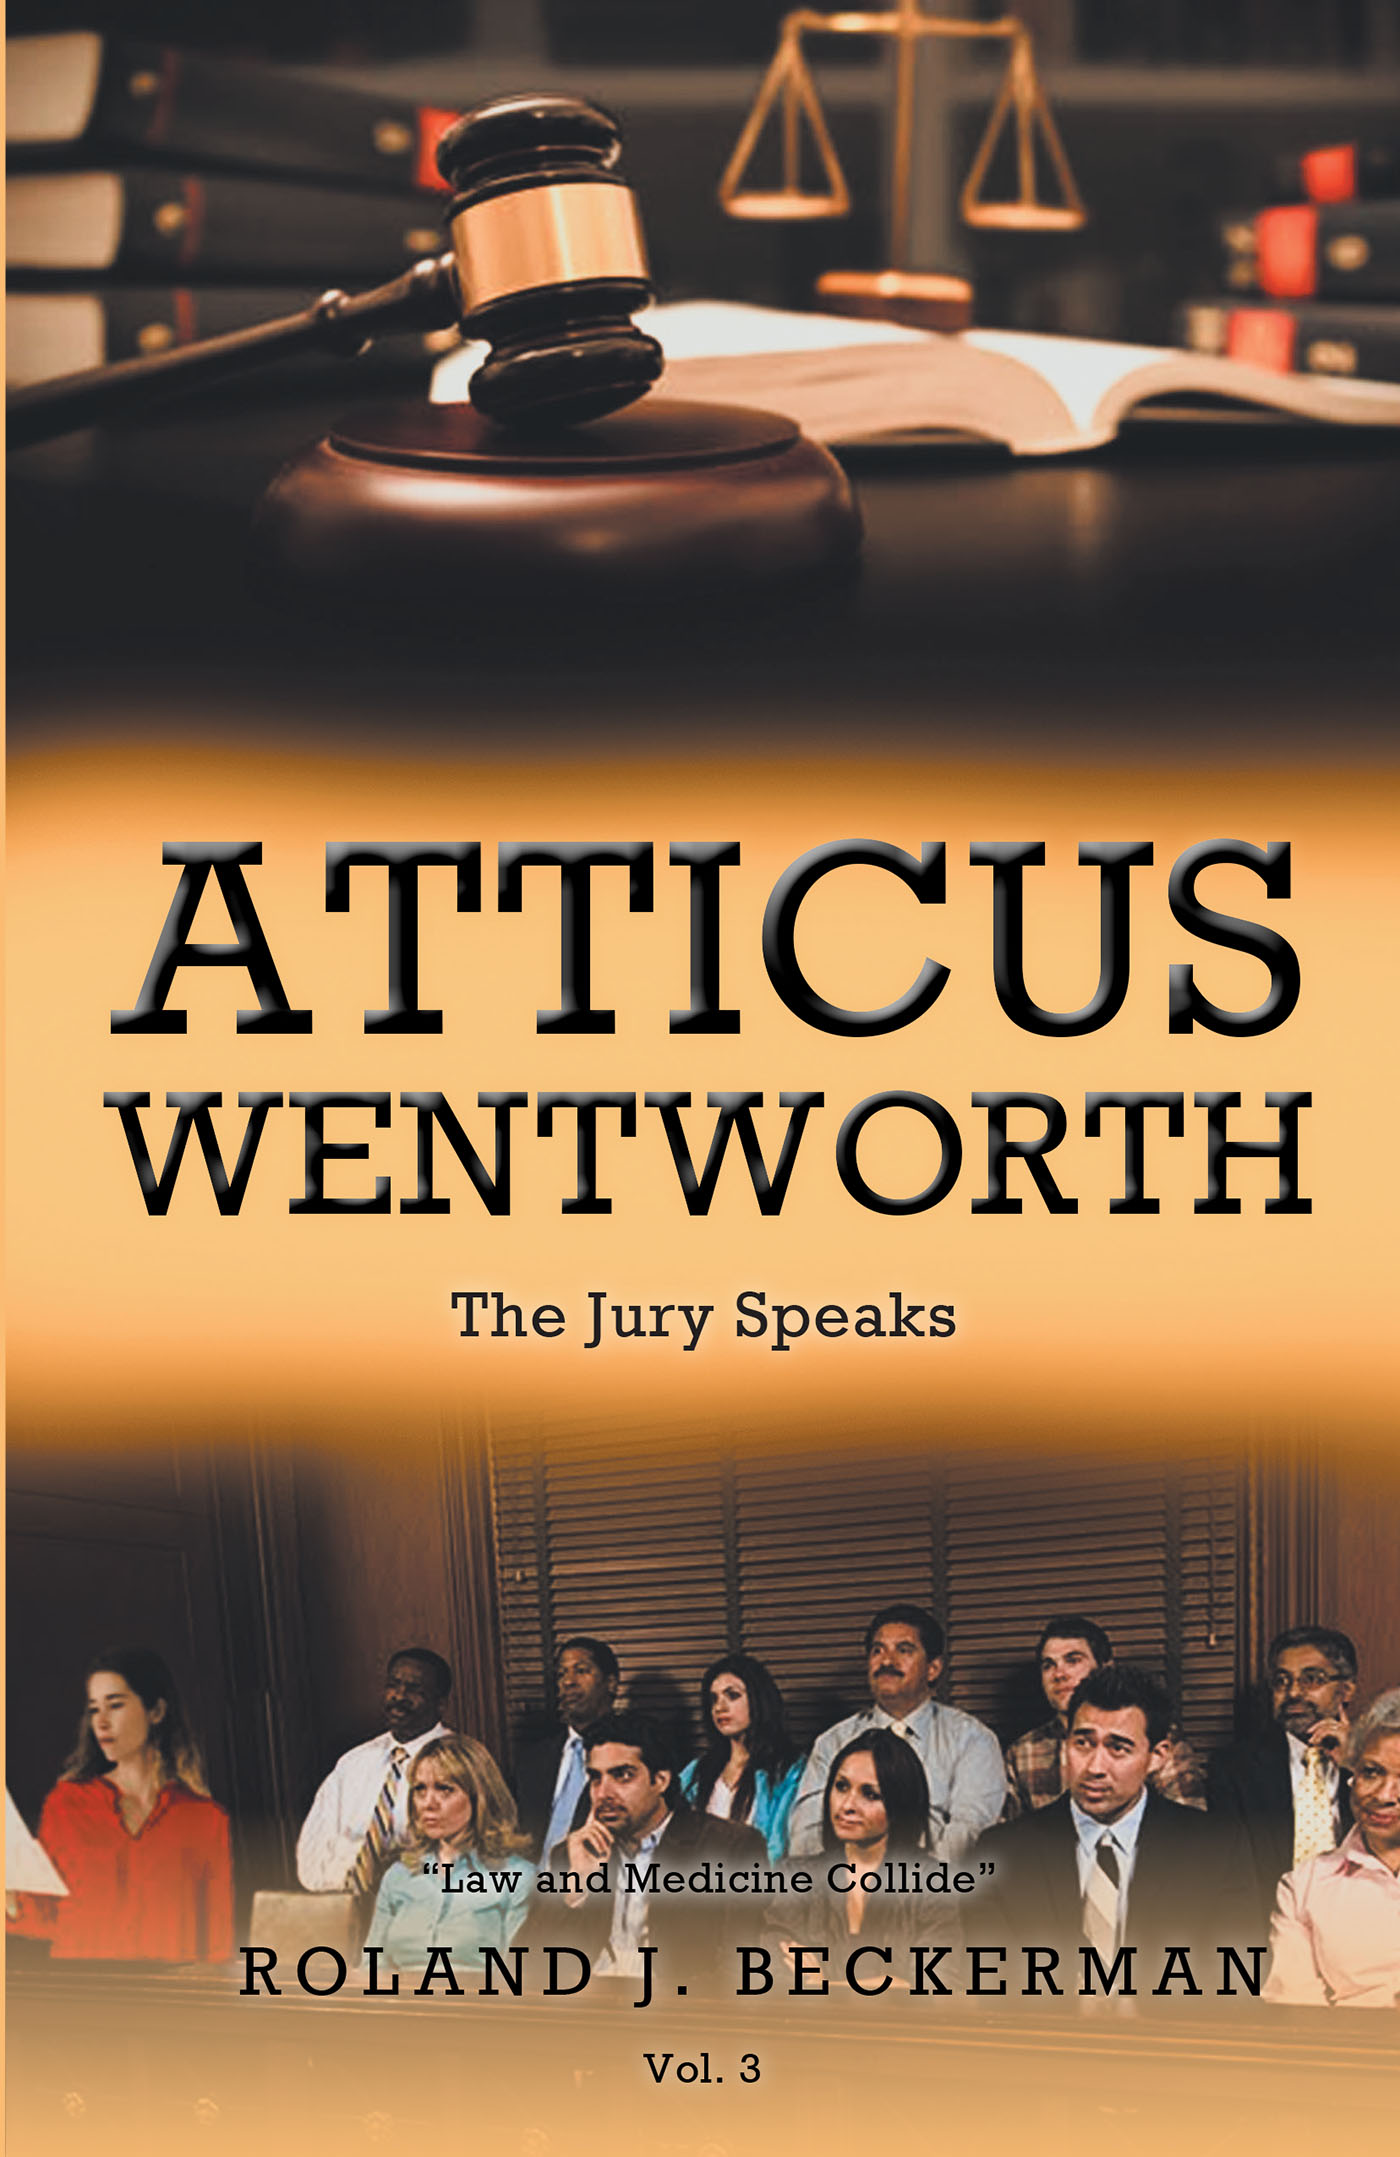 Author Roland J. Beckerman’s New Book, "Atticus Wentworth: The Jury Speaks," Centers Around a Thrilling Criminal Trial, and the Only Ones Who Can Unravel the Mystery